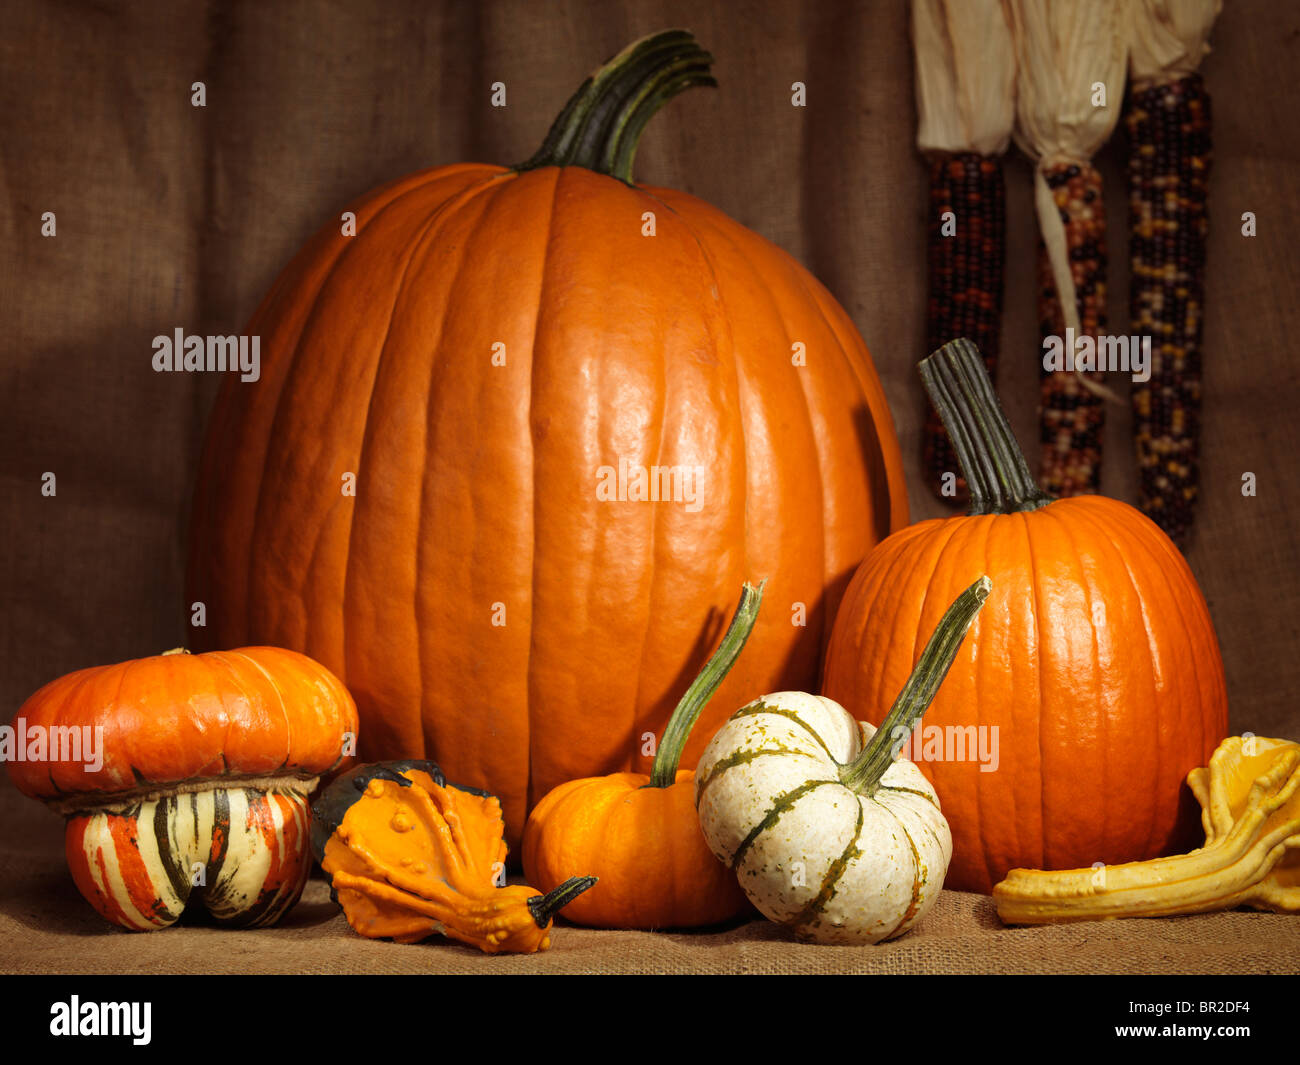 Pumpkins, gourds and indian corn artistic still life on burlap background Stock Photo